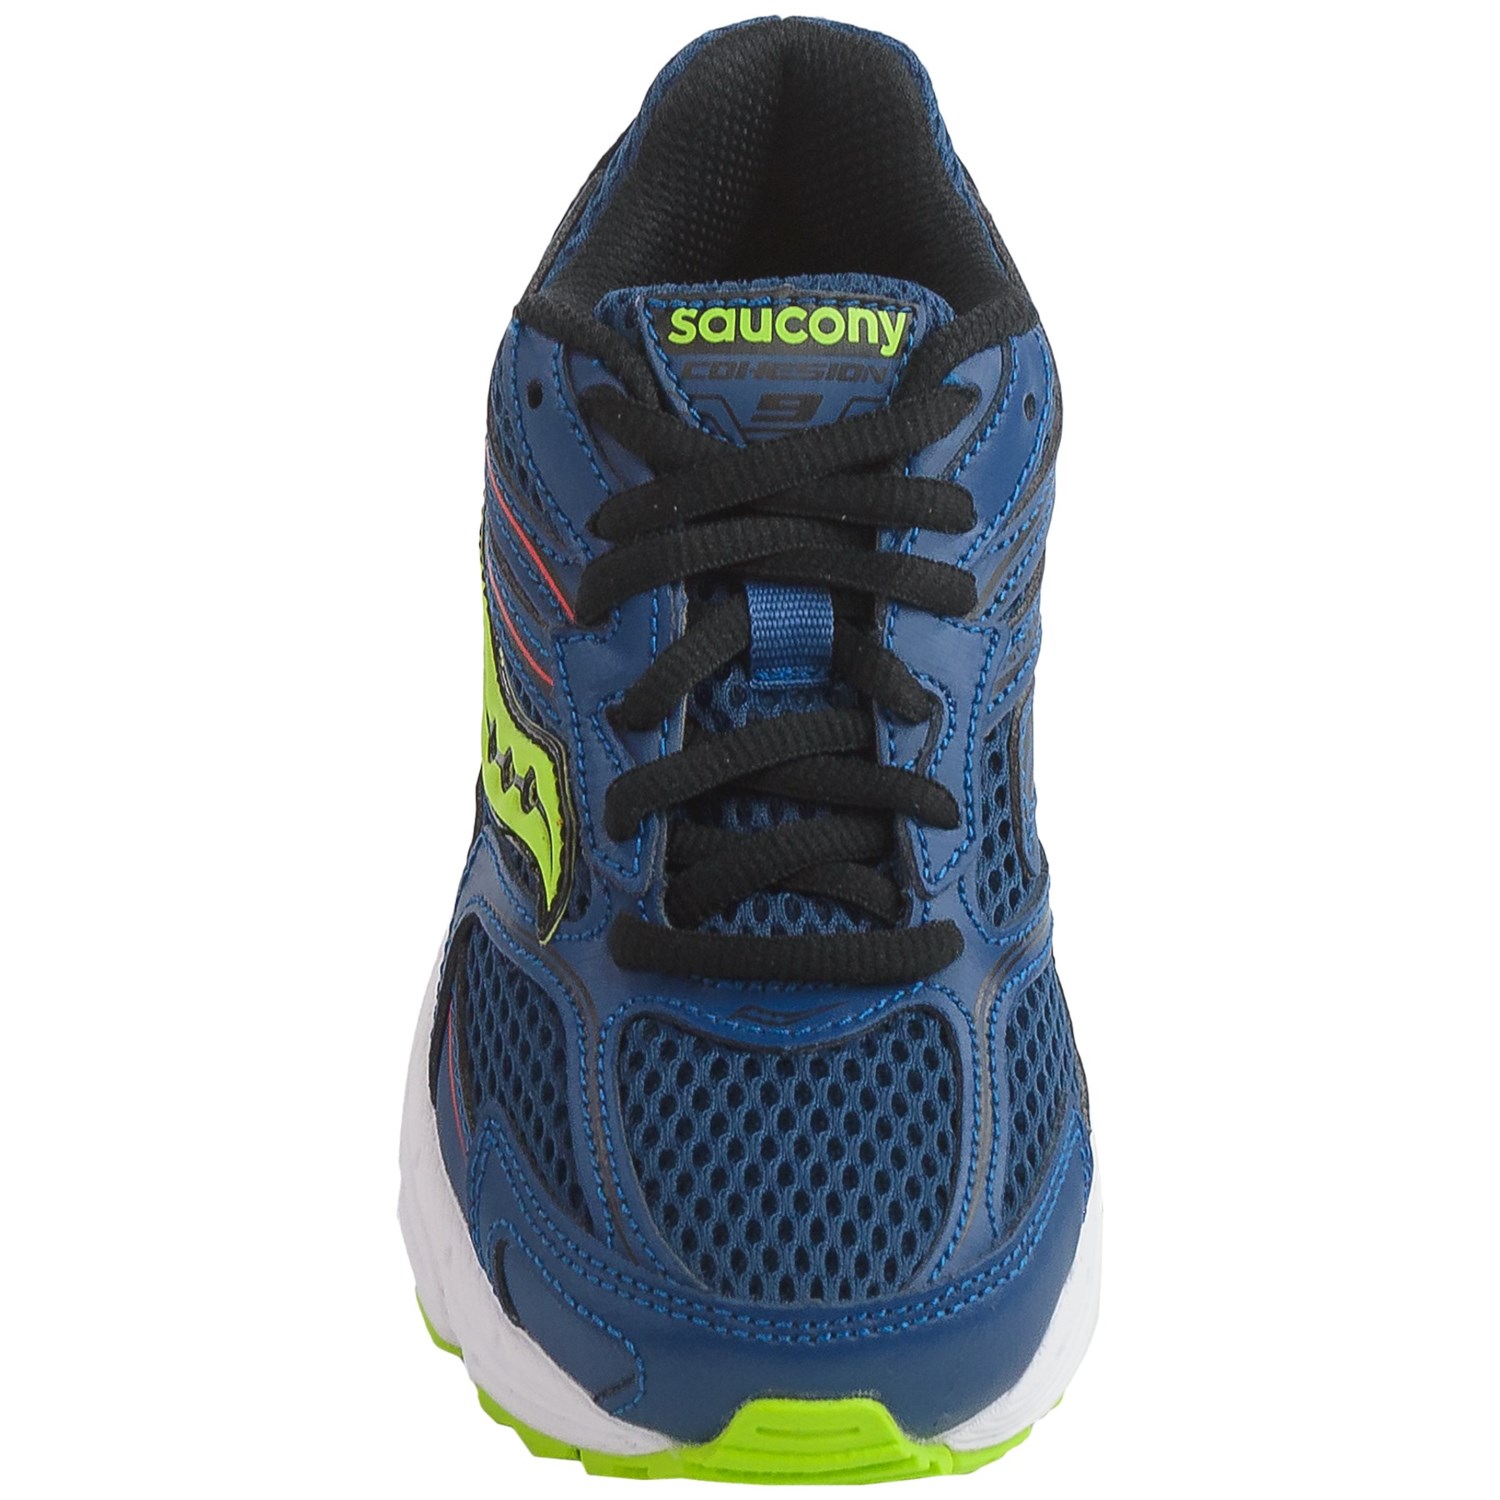 do saucony shoes run big or small